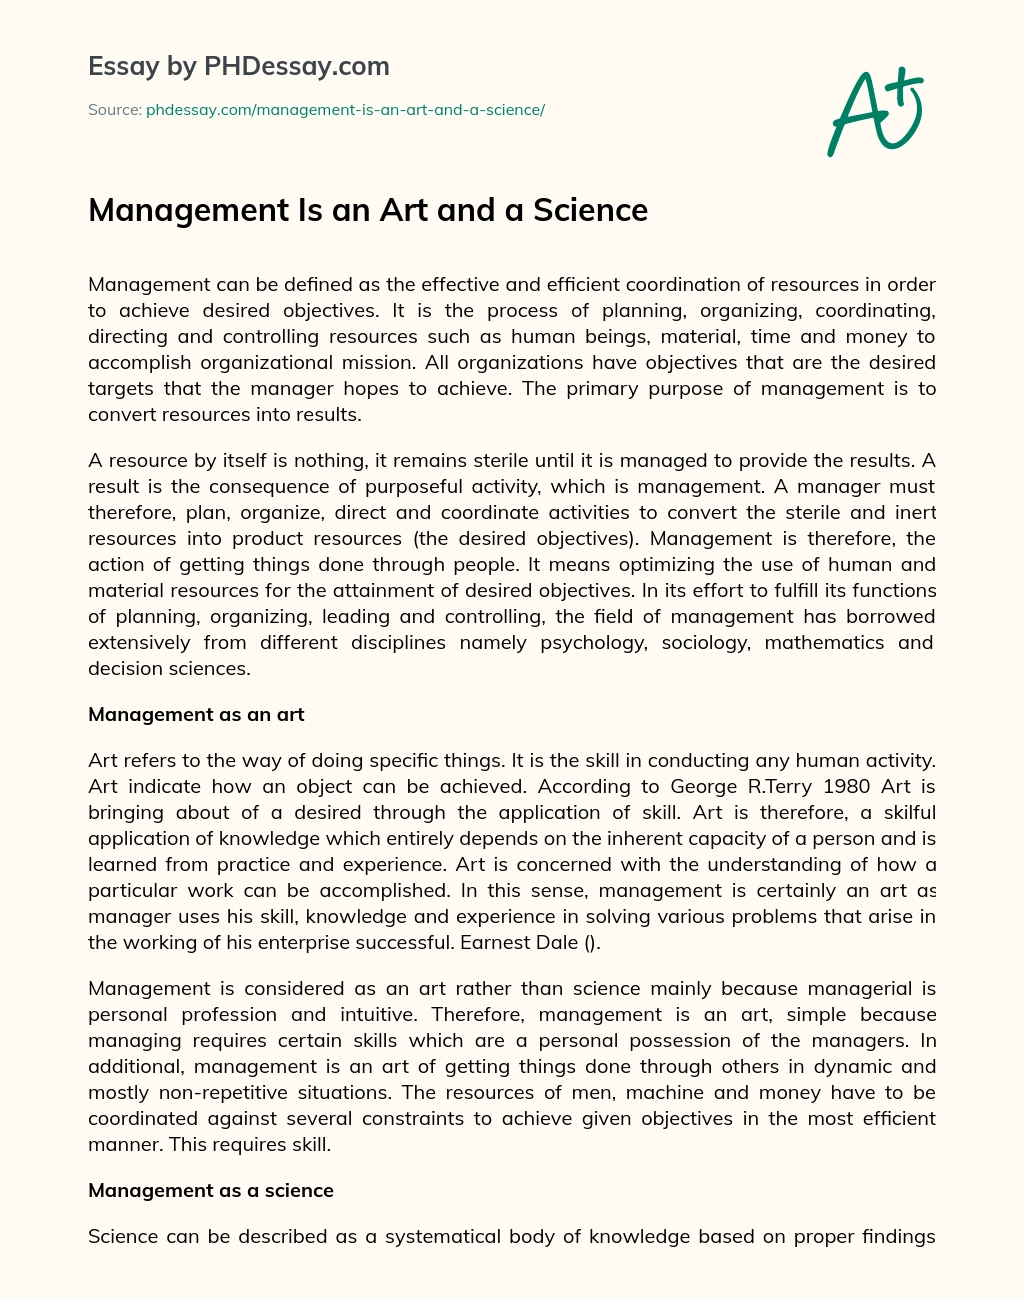 Management Is an Art and a Science essay